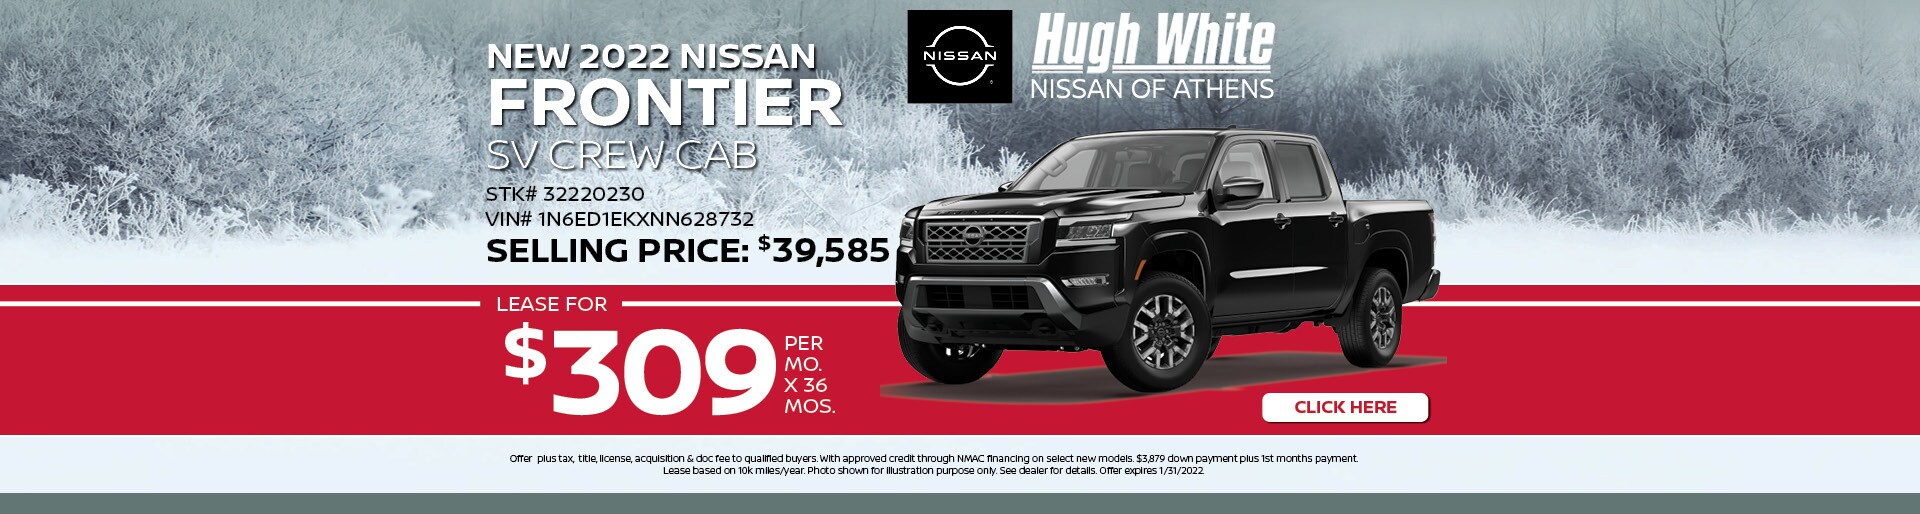 2022 Nissan Frontier Lease Offer | Hugh White Nissan Athens